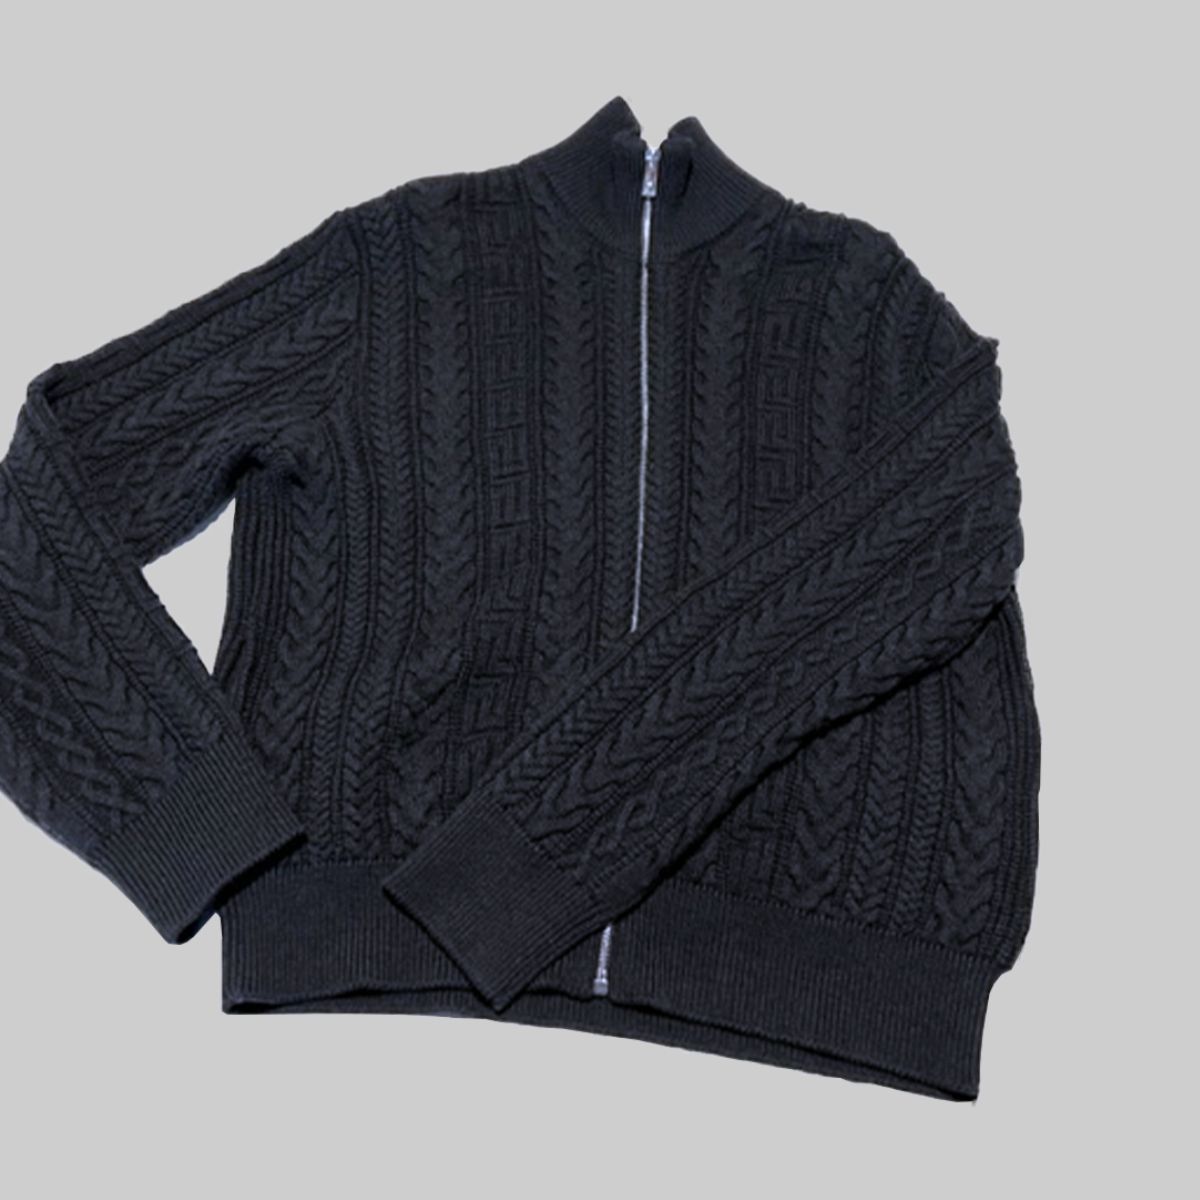 Knitted Jacket Allover